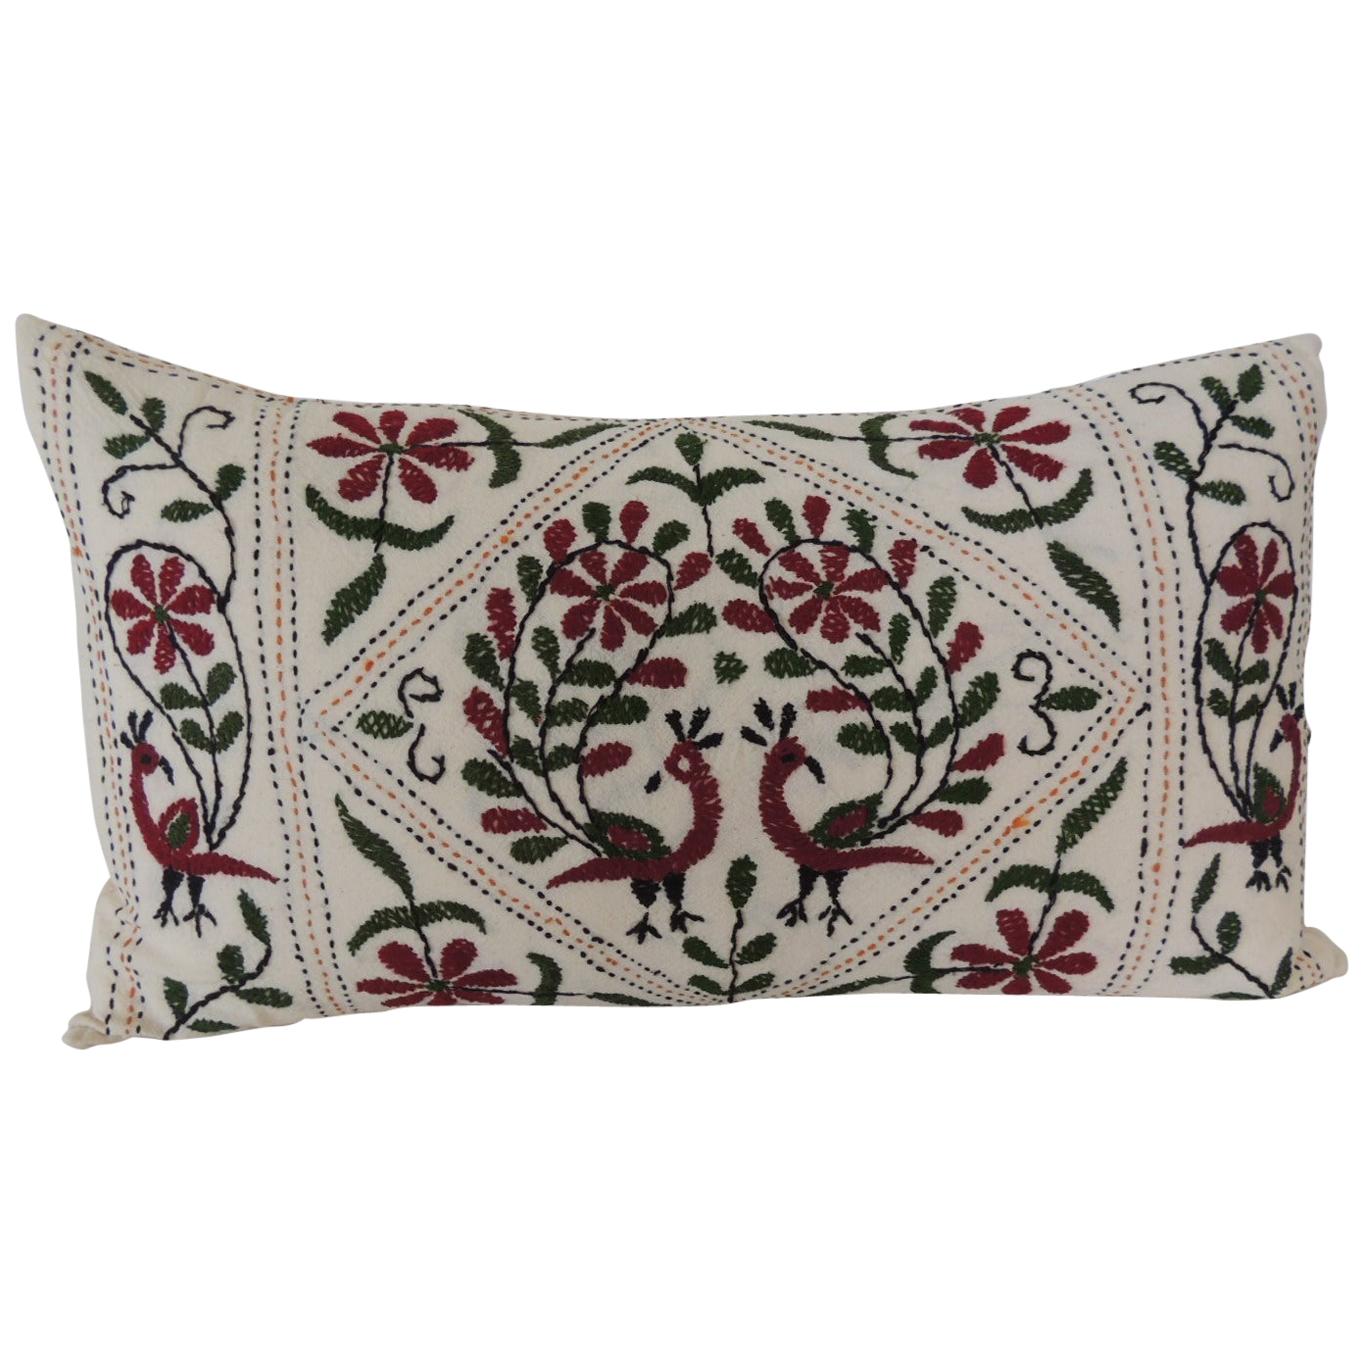 Vintage Indian Colorful Floral Embroidered Decorative Bolster Pillow